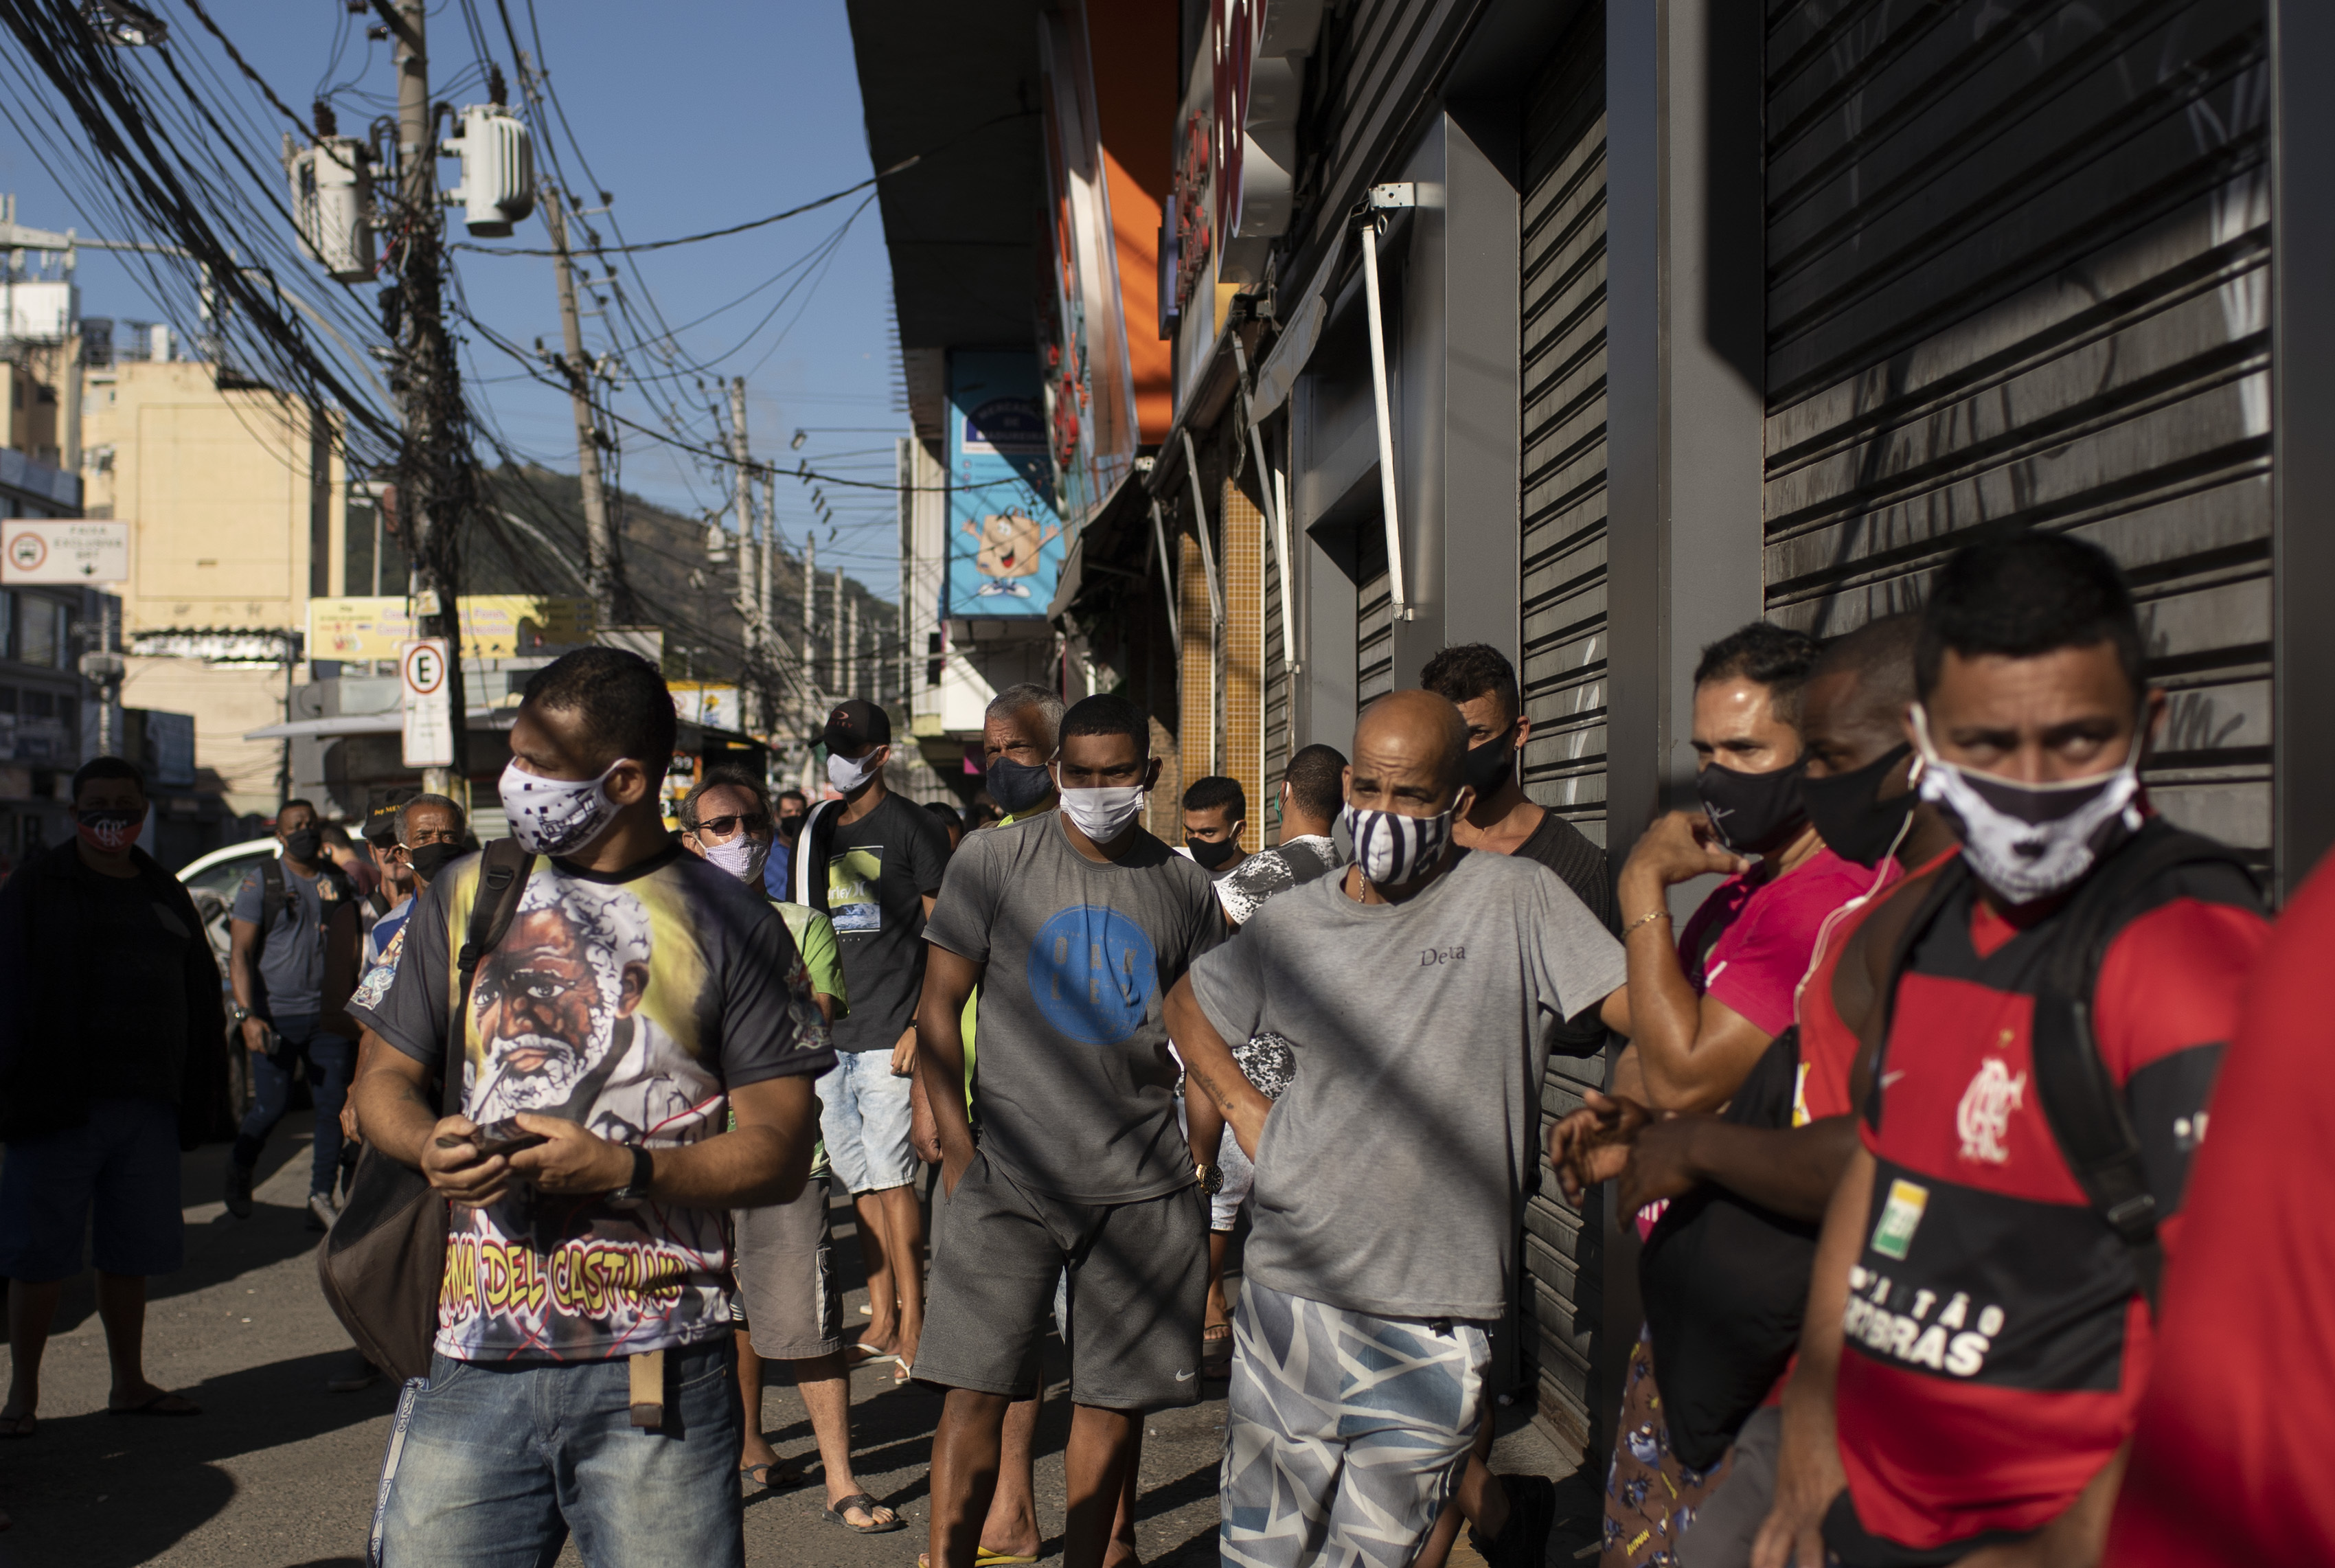 Customers wait to enter the Madureira Market in Rio de Janeiro, Brazil, Wednesday, June 17, 2020. Rio continues with its plan to ease restrictive measures and open the economy to avoid an even worse economic crisis, amid the new coronavirus pandemic. Photo: AP